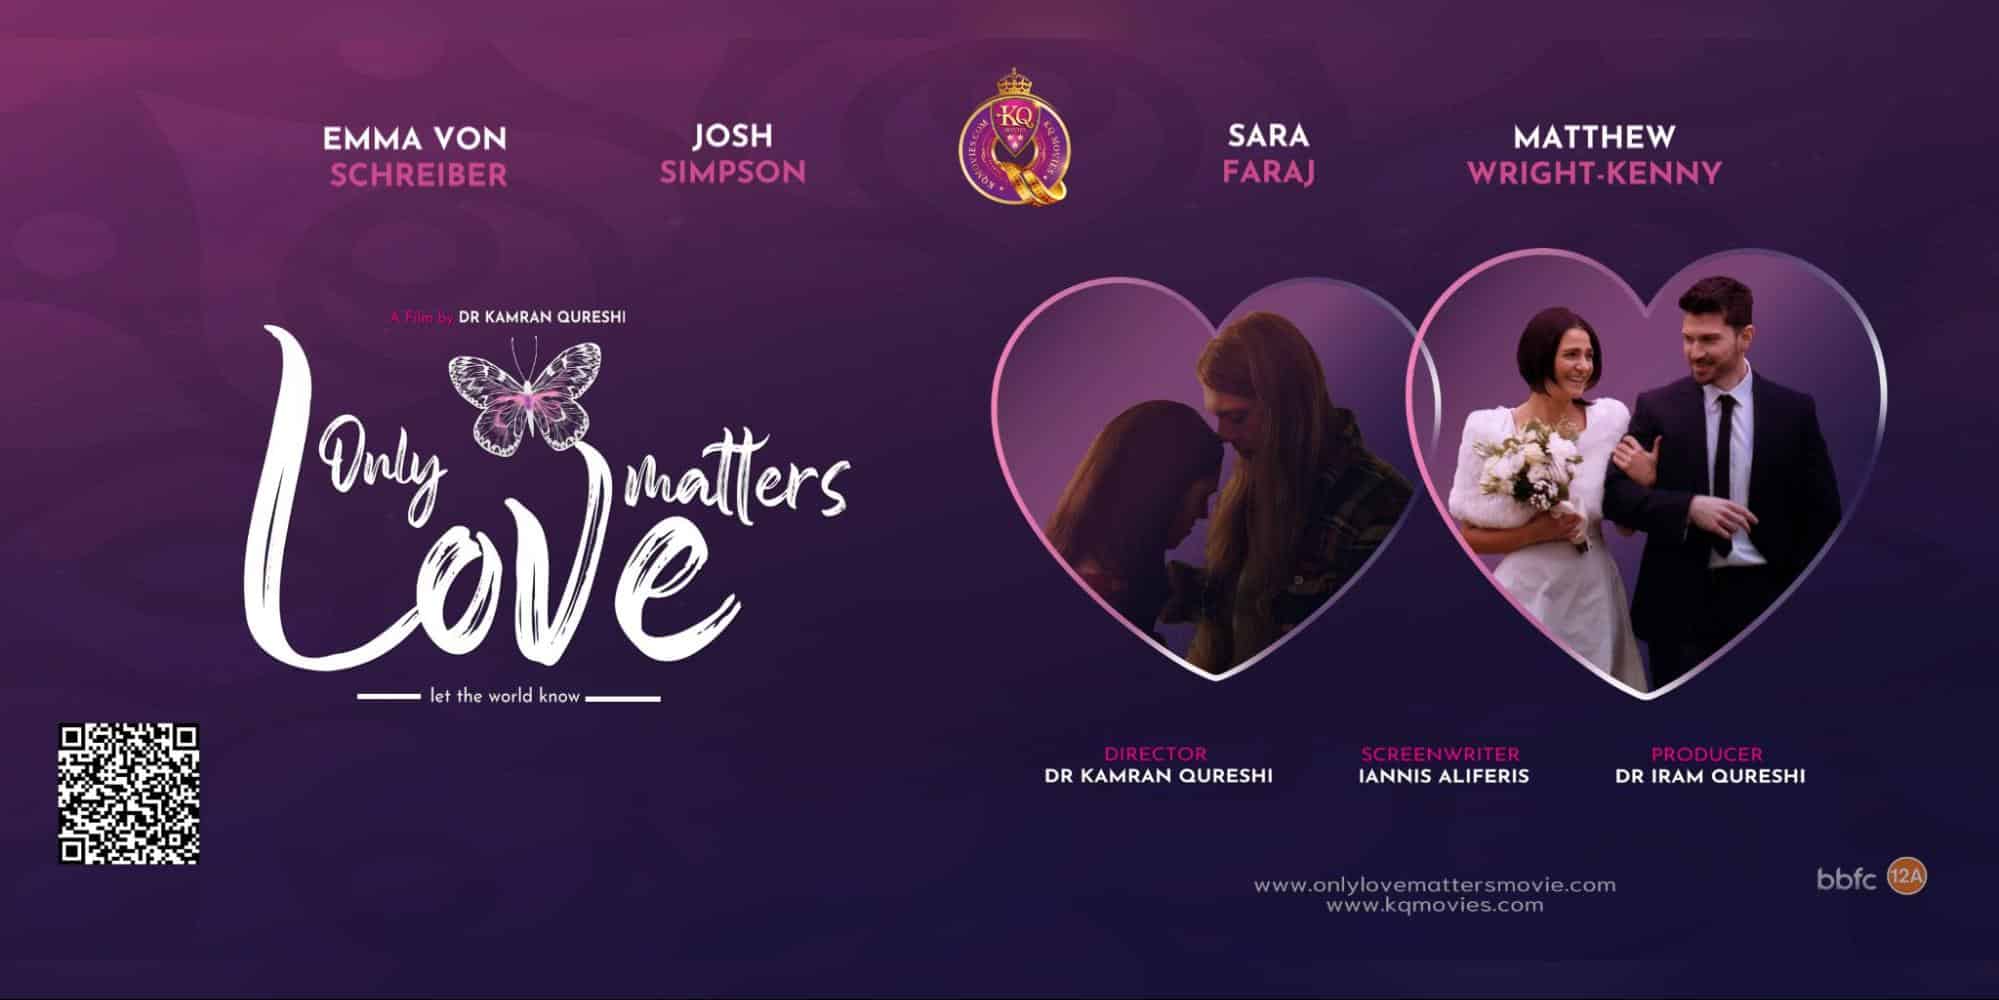 Groundbreaking Intersex Film “Only Love Matters” Premieres to Acclaim